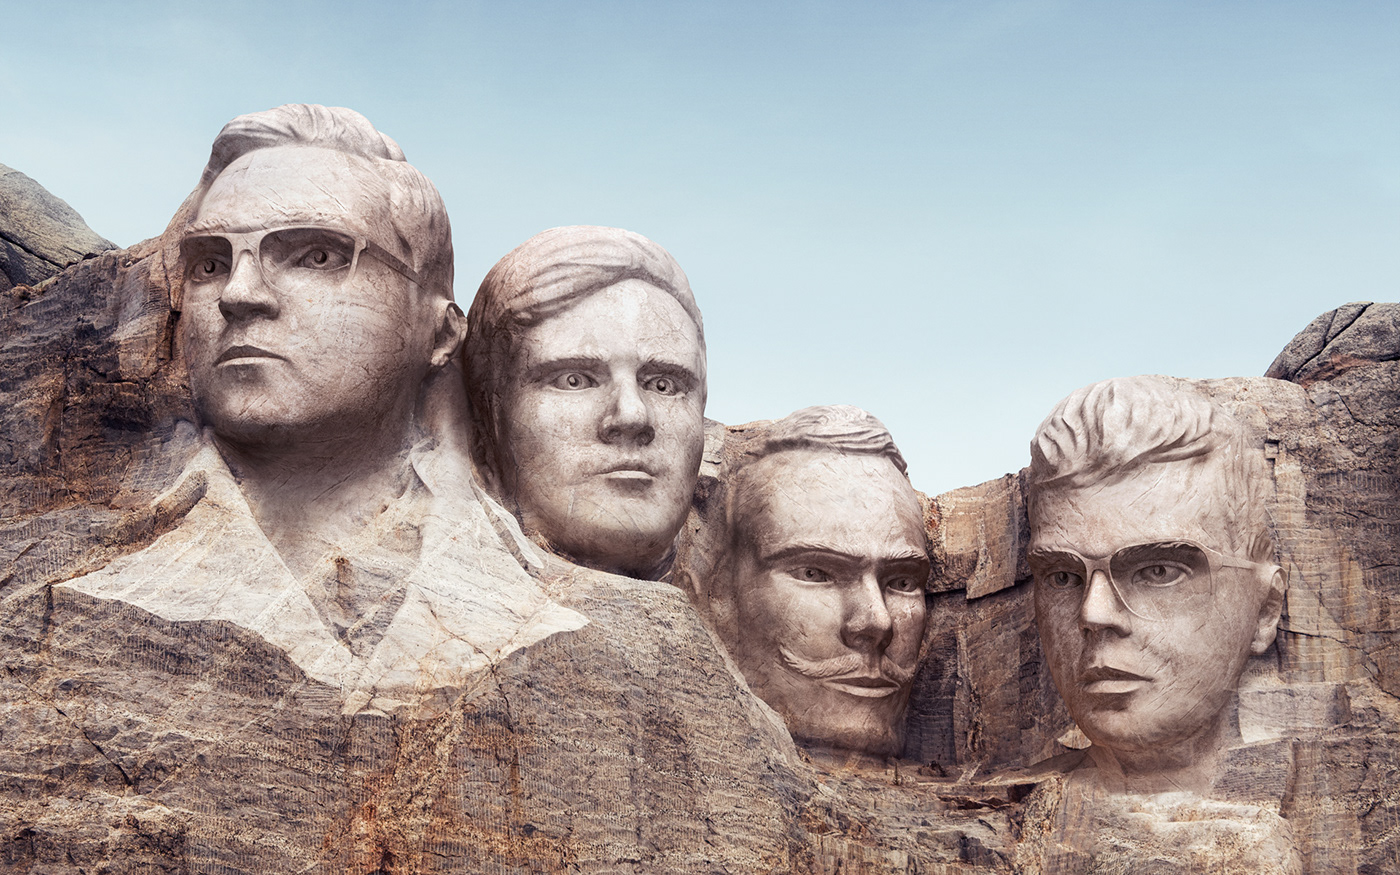 Event poster of 4 DJs on Mount Rushmore